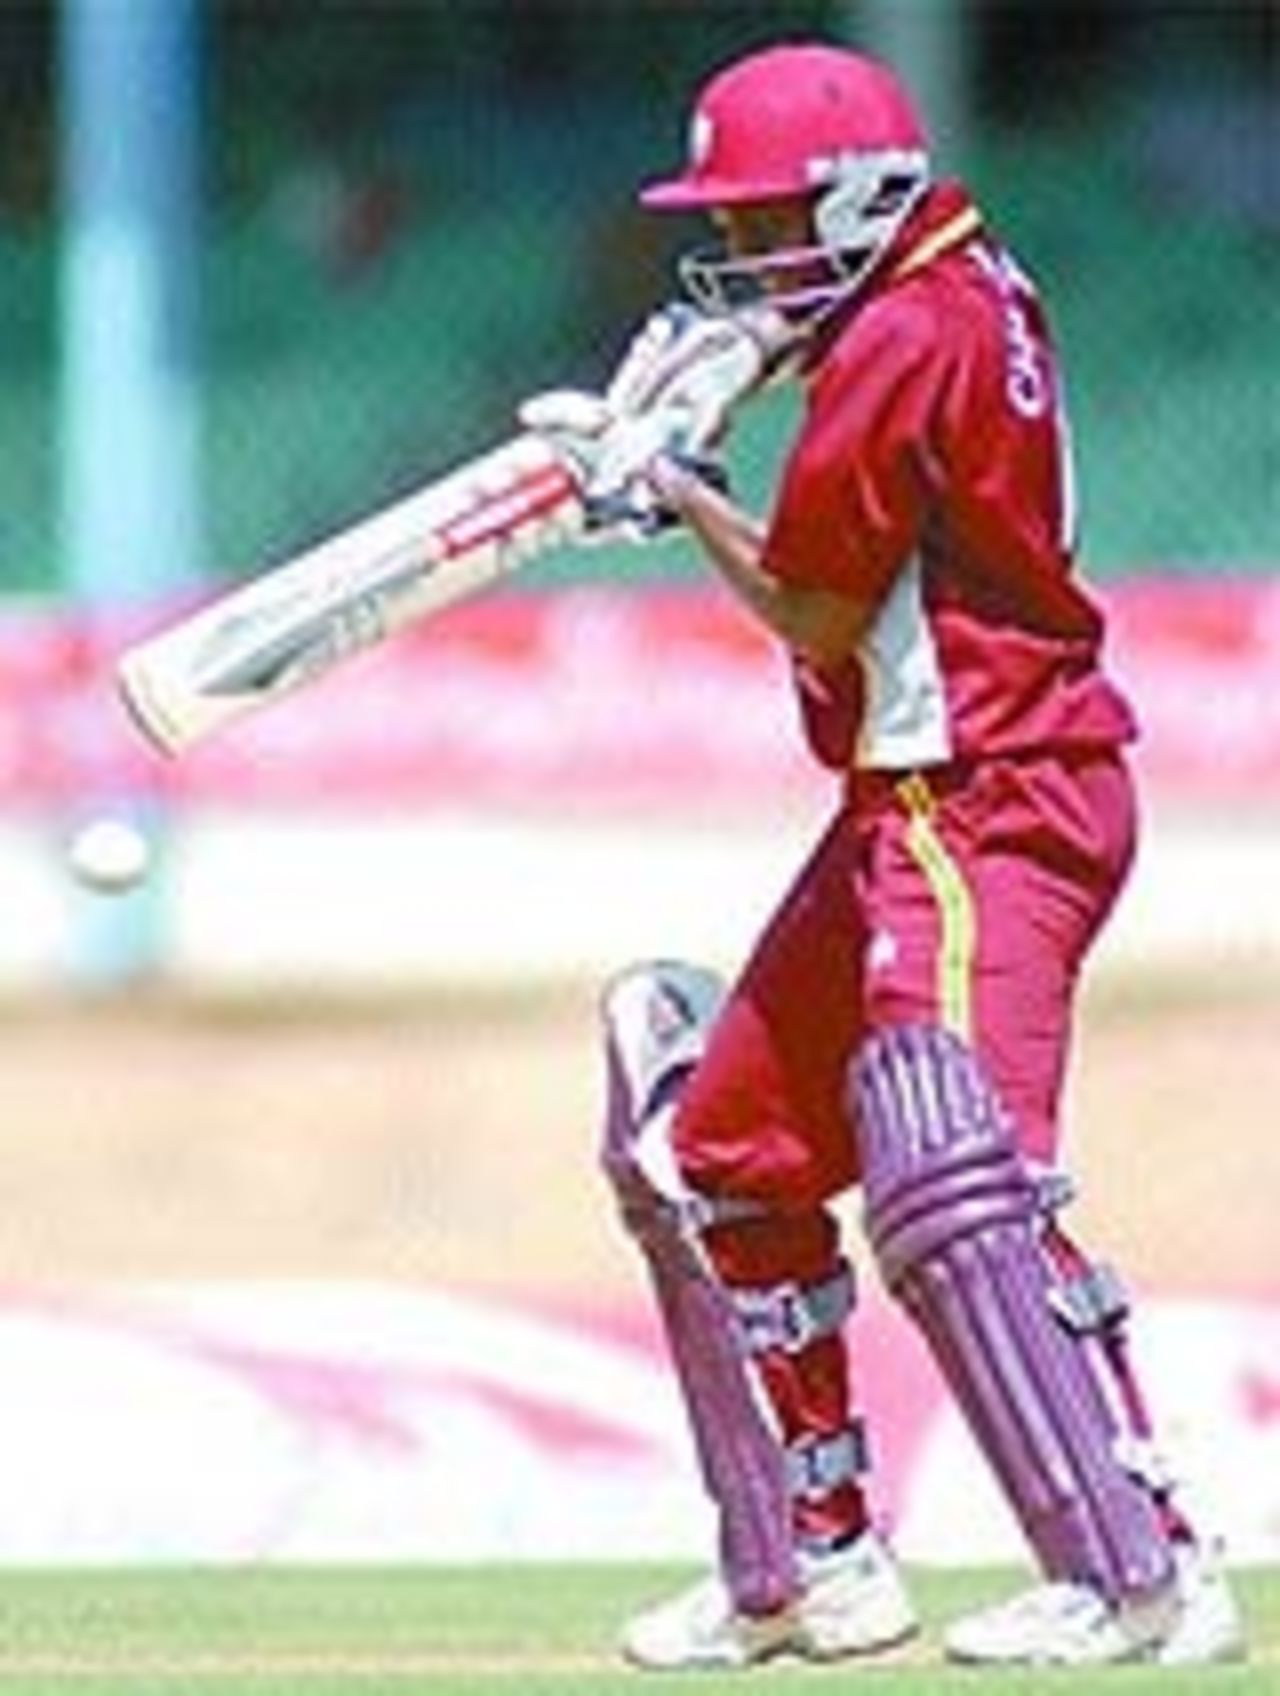 Shivnarine Chanderpaul cuts during his knock of 45, West Indies v Zimbabwe, 7th ODI, Port of Spain, May 14 2006